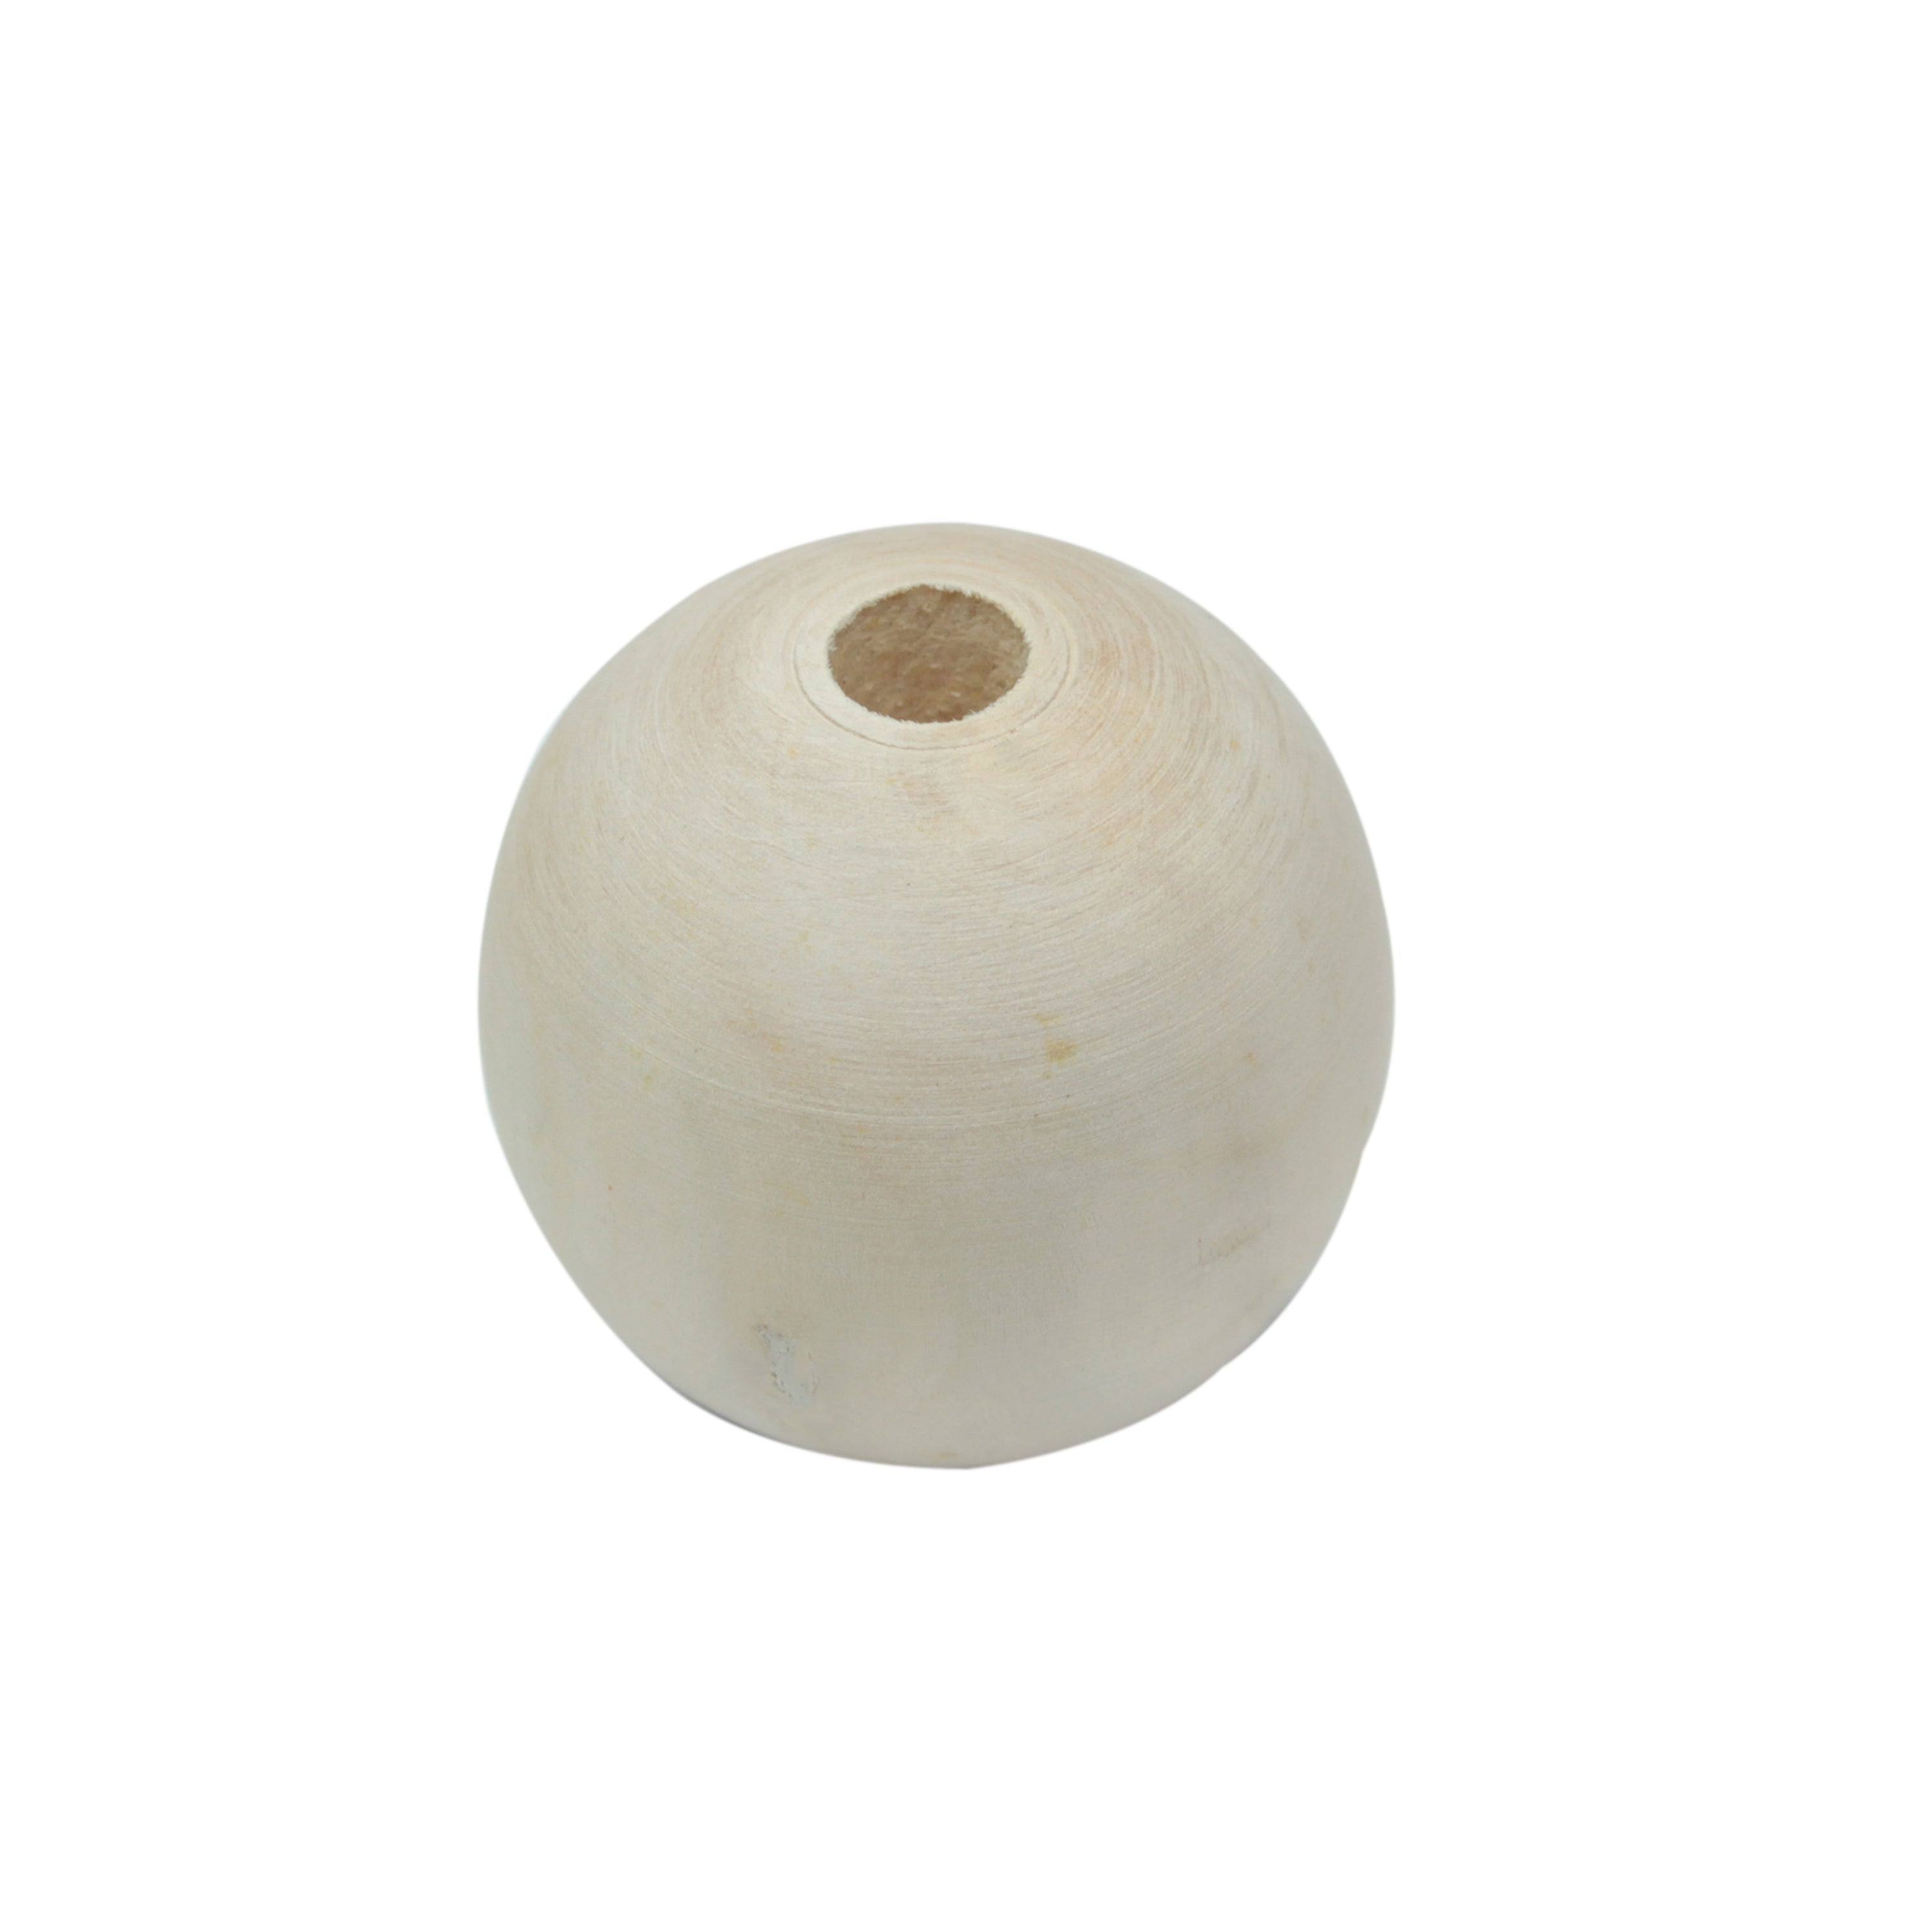 Wooden Ball With Hole 1.5Inch Natural 4Pc Pbhc Lb